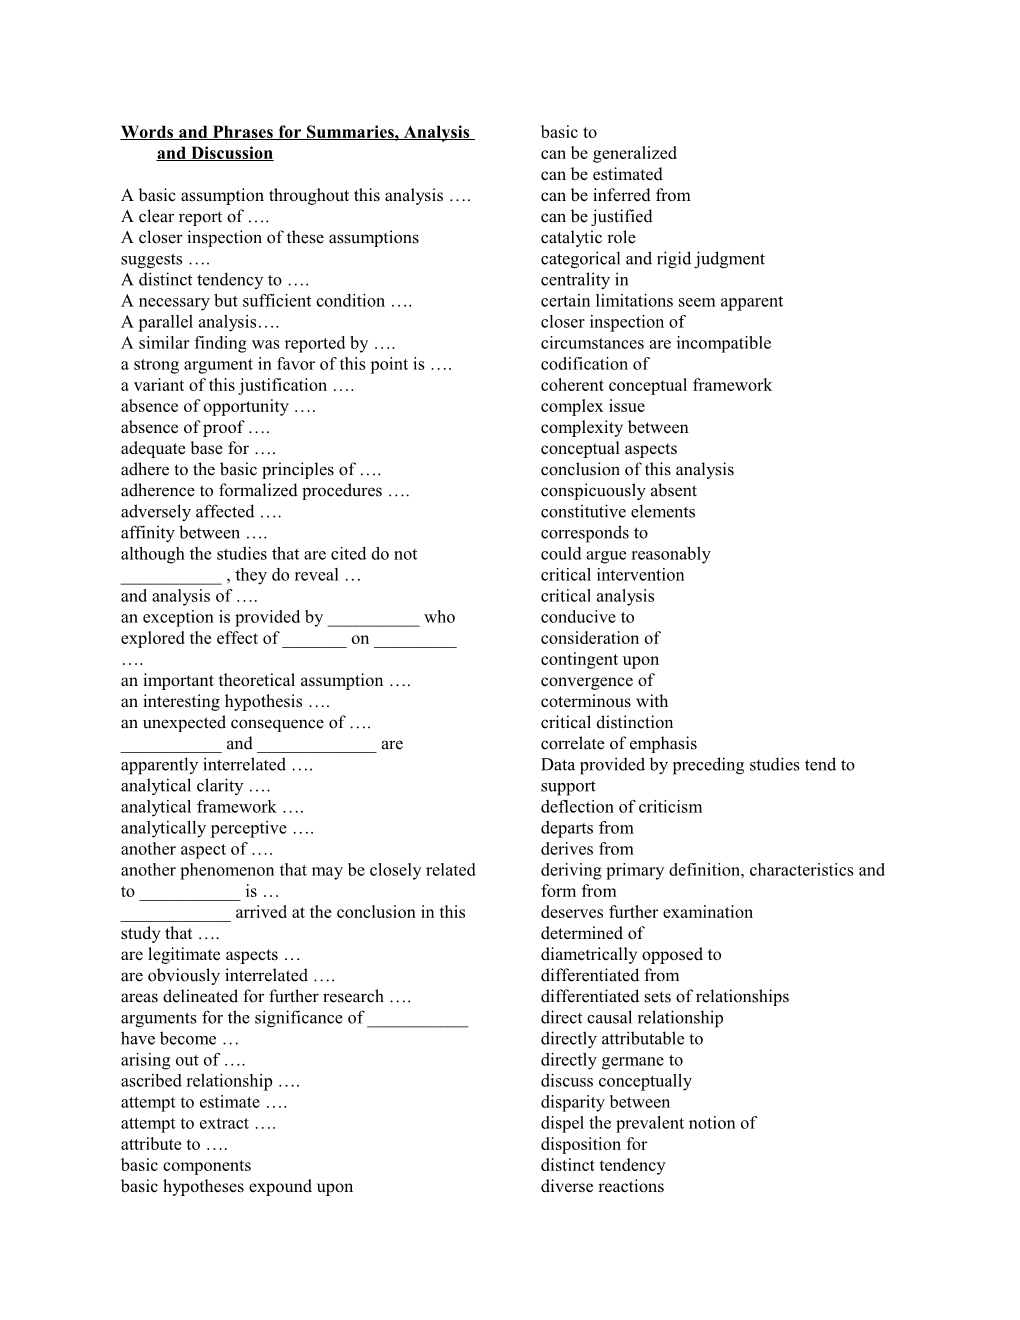 Words and Phrases for Summaries, Analysis and Discussion